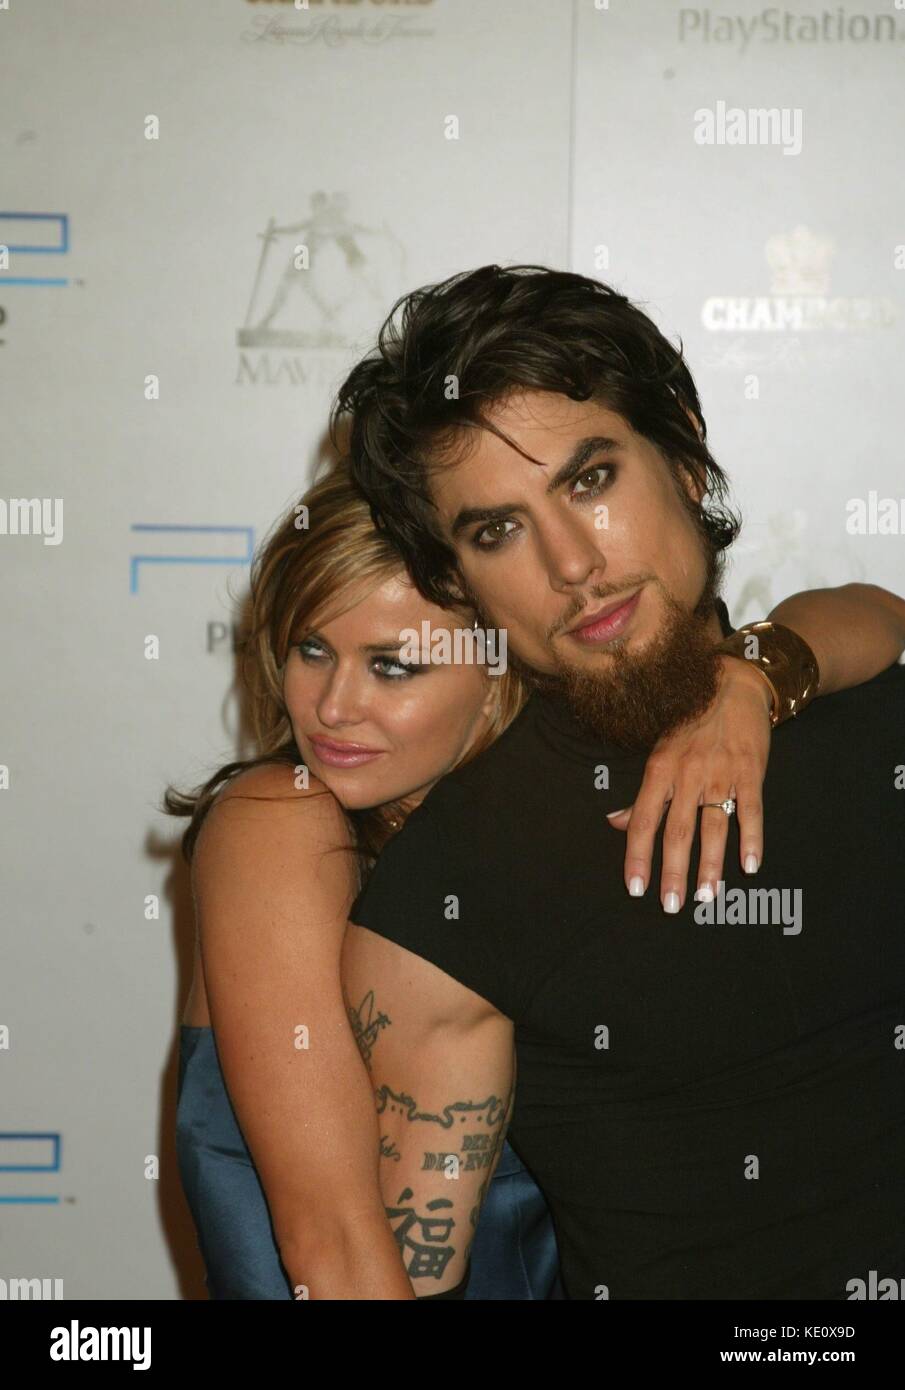 Carmen Electra & her fiance Dave Navarro attending the Maverick Records 2003 VMA after party at the Four Seasons Restaurant in New York City.  August 28, 2003  © Joseph Marzullo / MediaPunch. Stock Photo